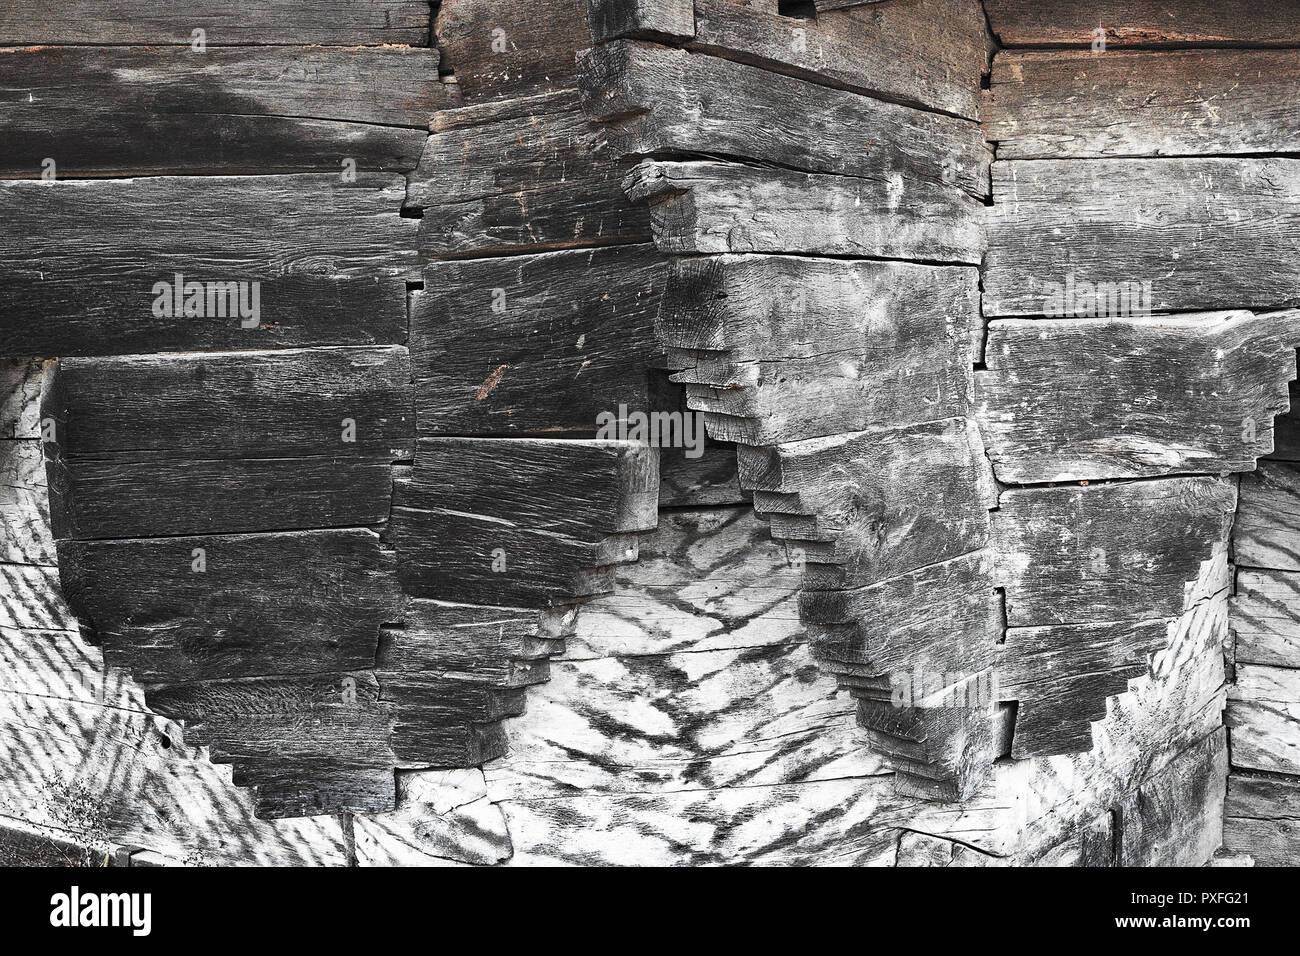 abstract image of wood joinery in old church, textural background Stock Photo